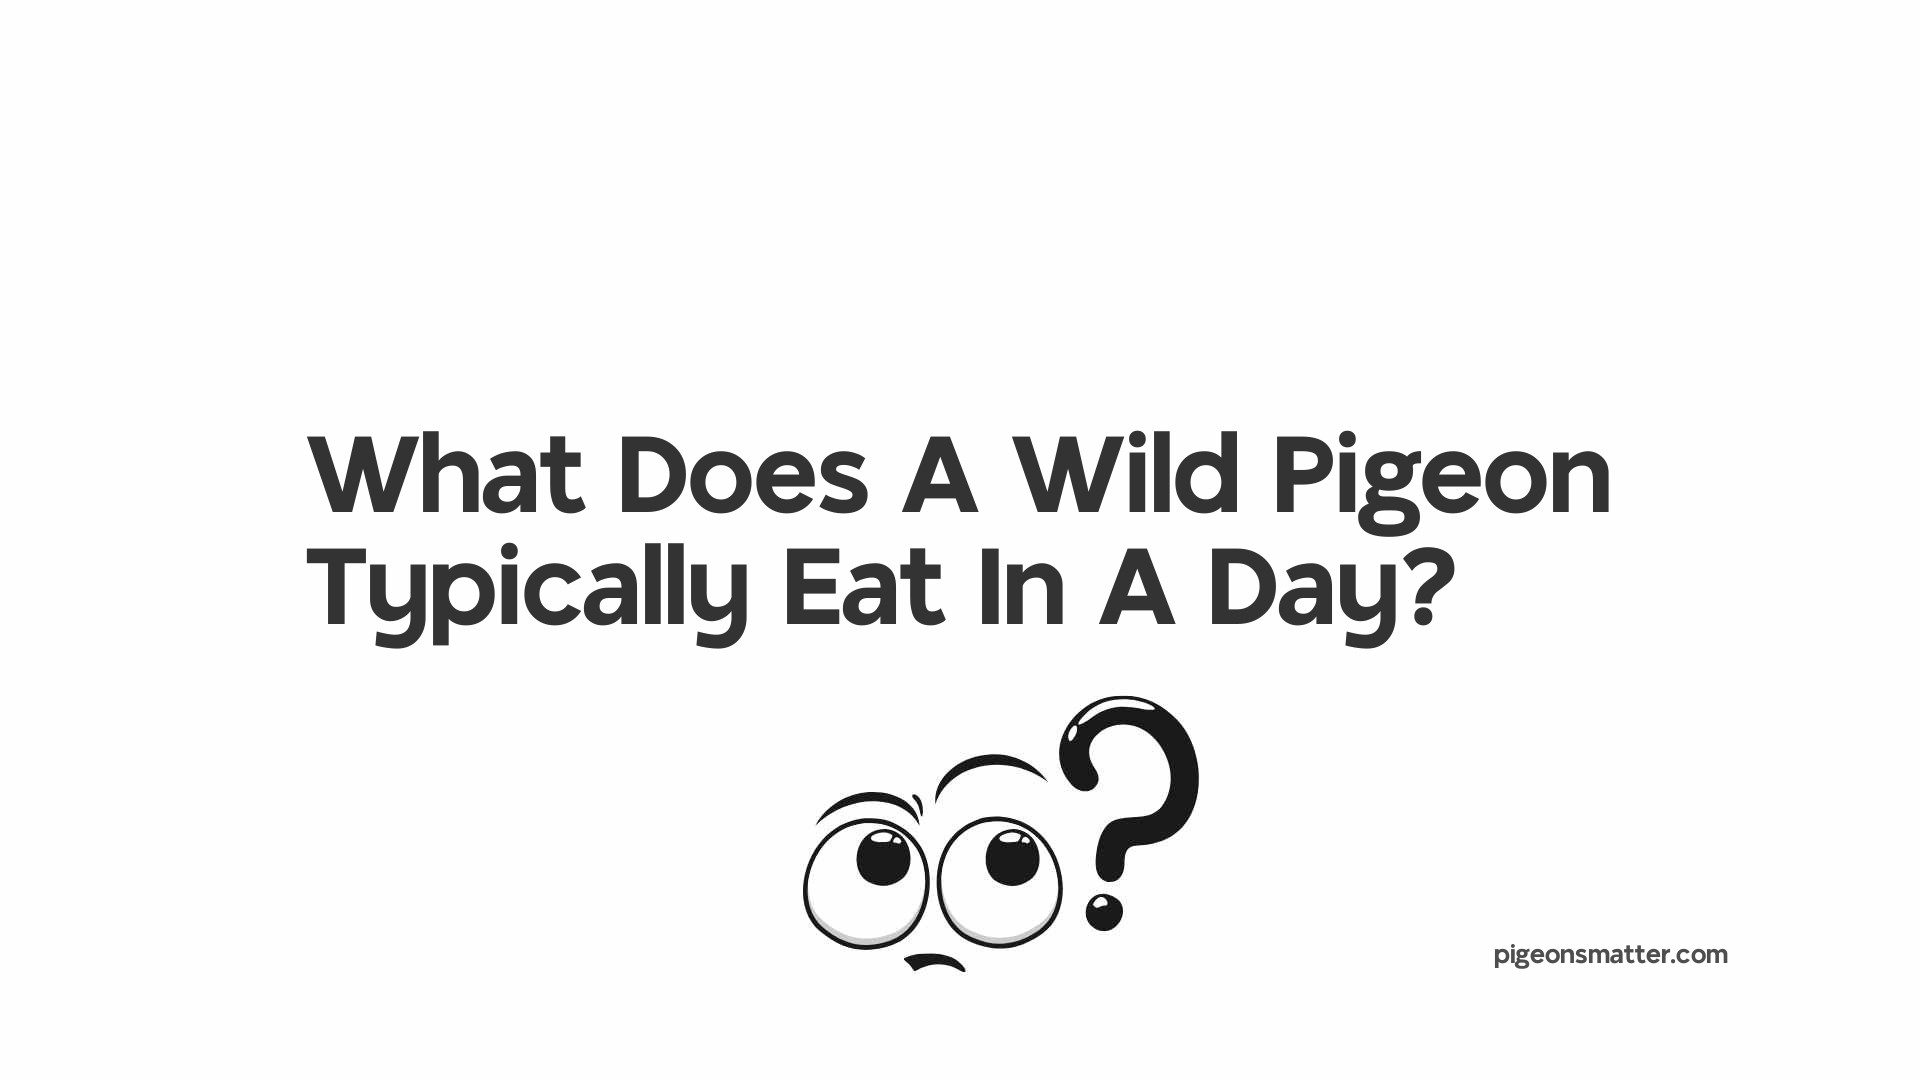 What Does A Wild Pigeon Typically Eat In A Day?